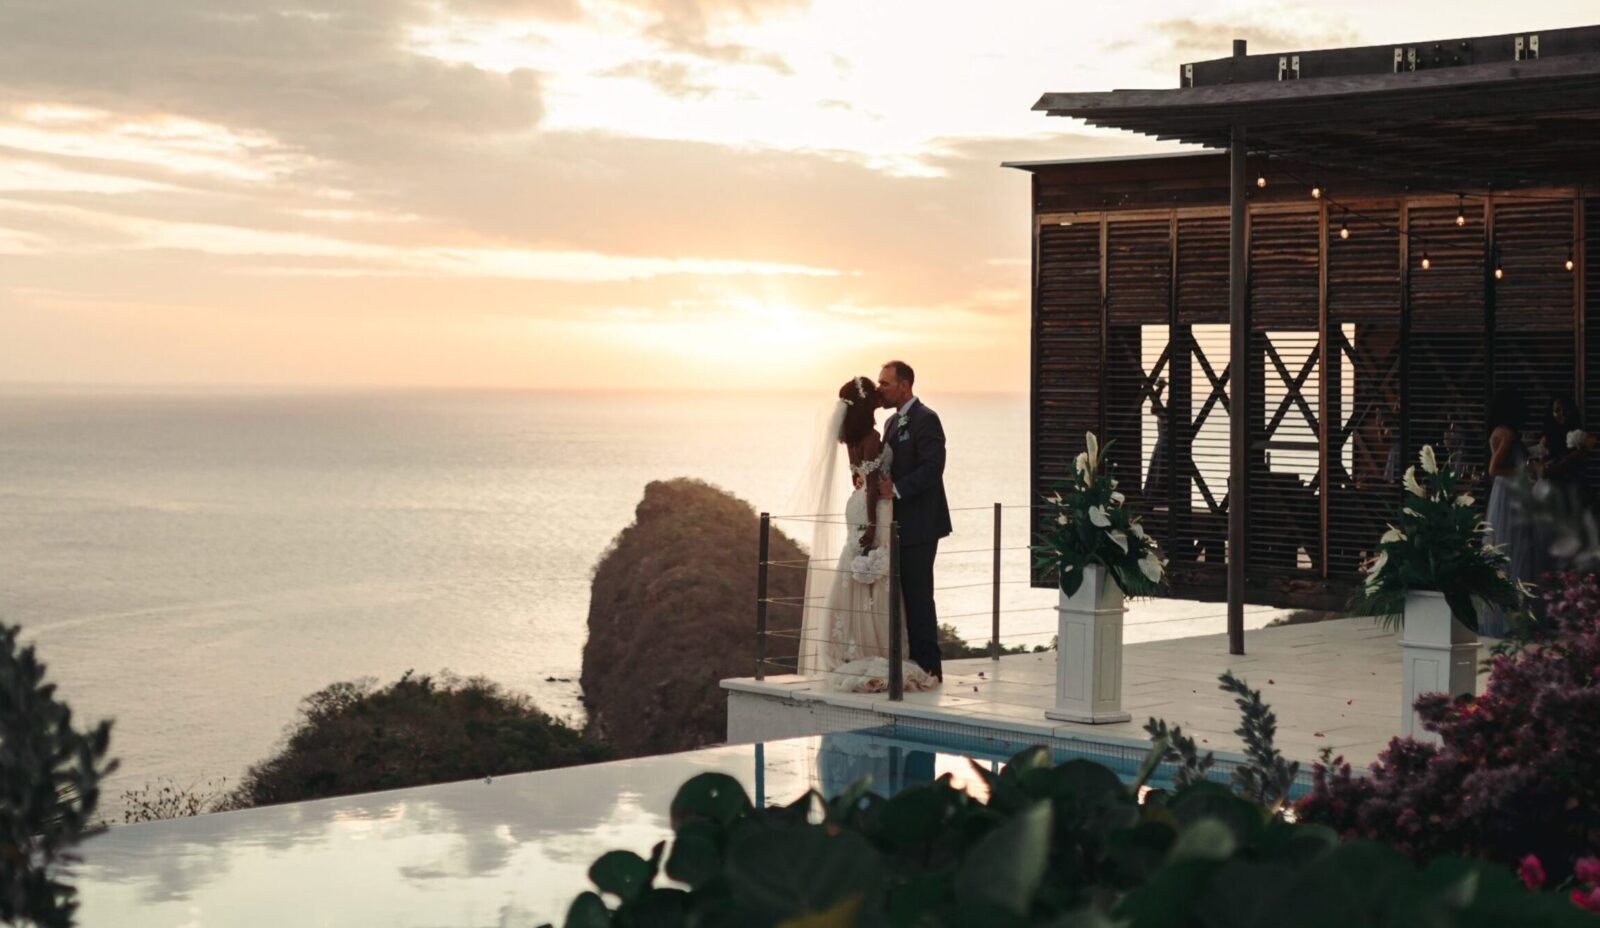 An interacial wed couple enjoy a quiet embrace ona terrace with the sea and sunset behind them